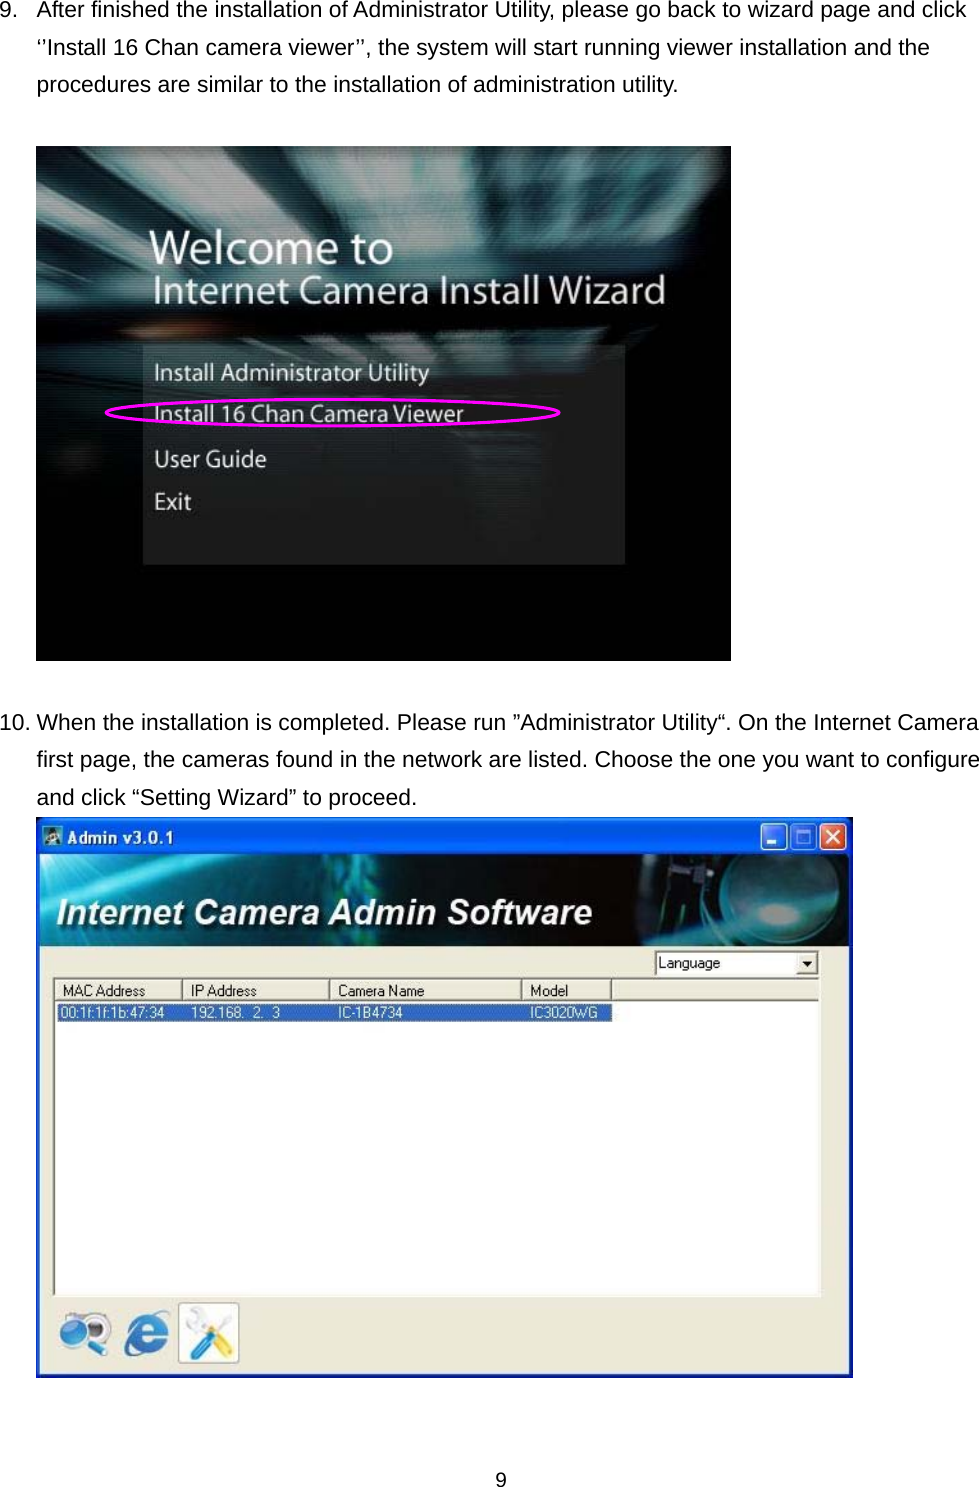    99.  After finished the installation of Administrator Utility, please go back to wizard page and click ‘’Install 16 Chan camera viewer’’, the system will start running viewer installation and the procedures are similar to the installation of administration utility.    10. When the installation is completed. Please run ”Administrator Utility“. On the Internet Camera first page, the cameras found in the network are listed. Choose the one you want to configure and click “Setting Wizard” to proceed.    